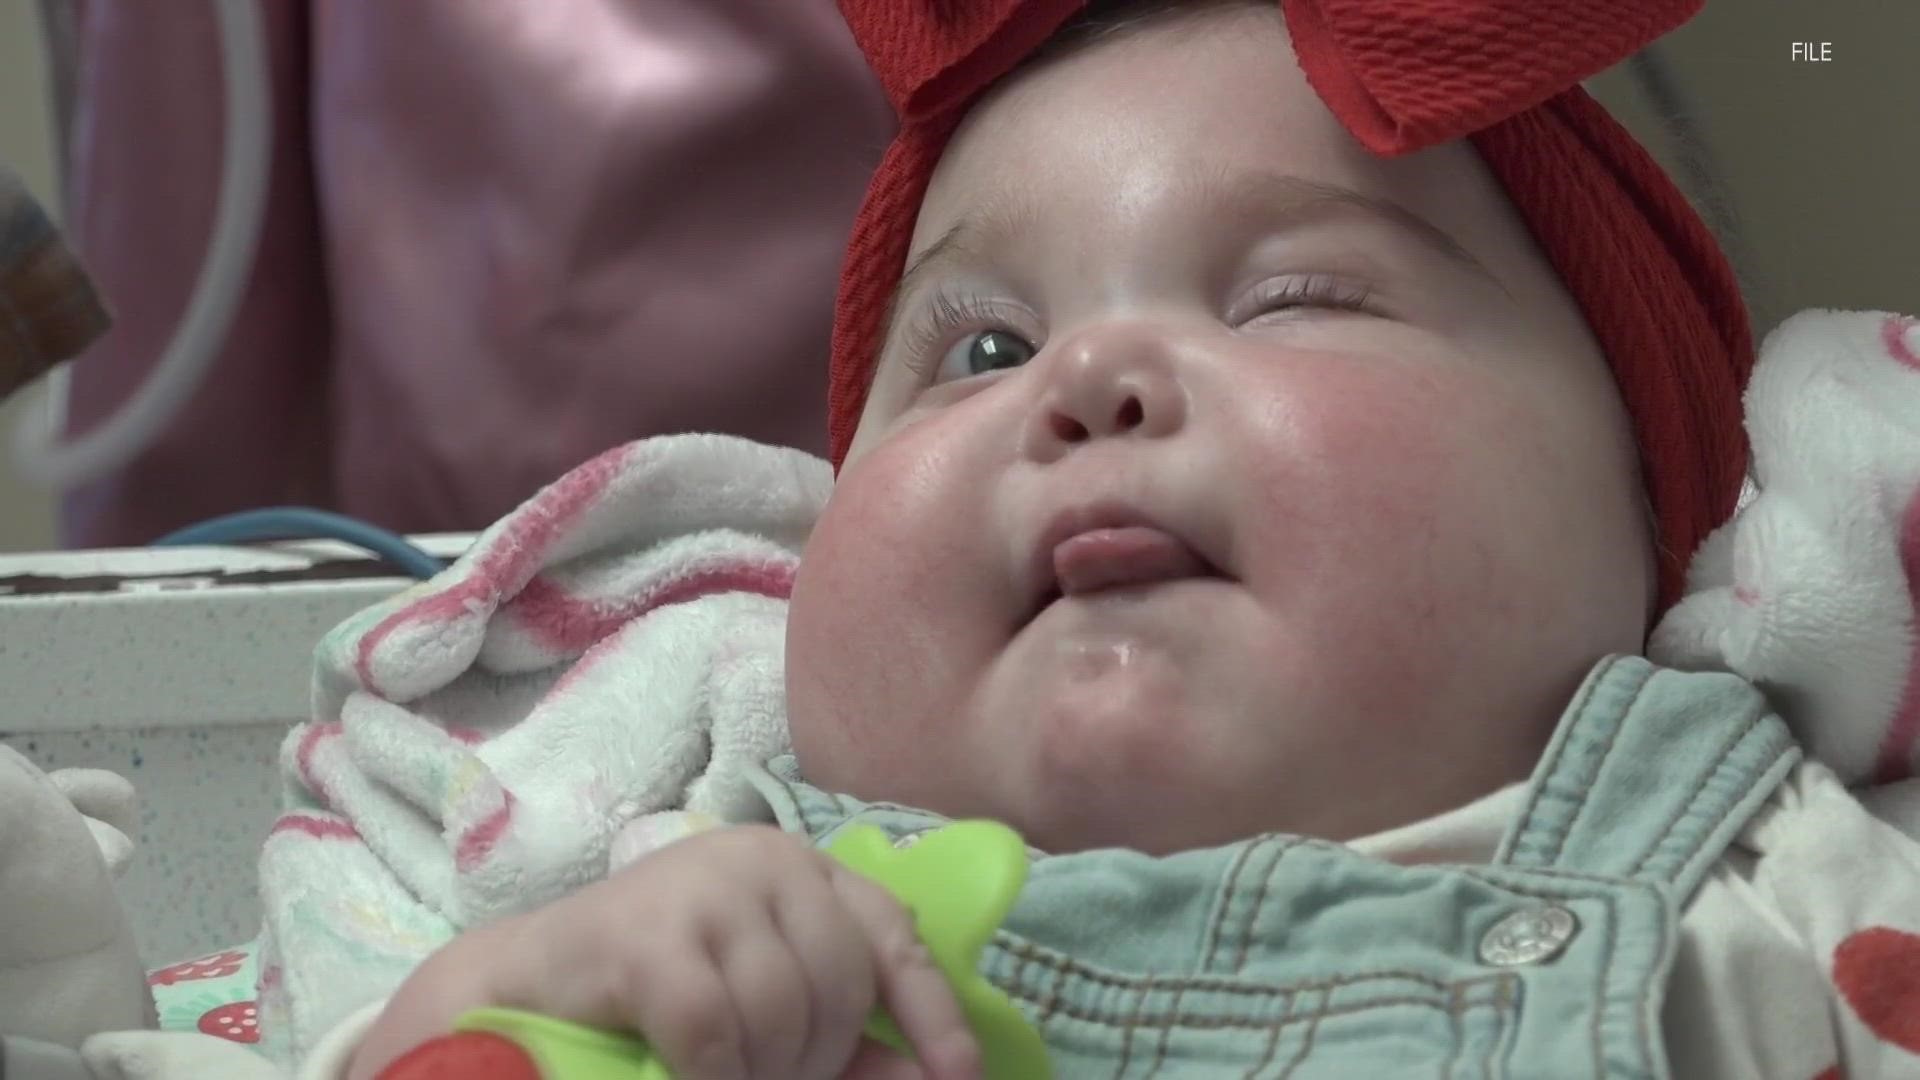 Isla Brown has spent all but 5 days of her life at Norton's Children's Hospital due to a severe heart defect.